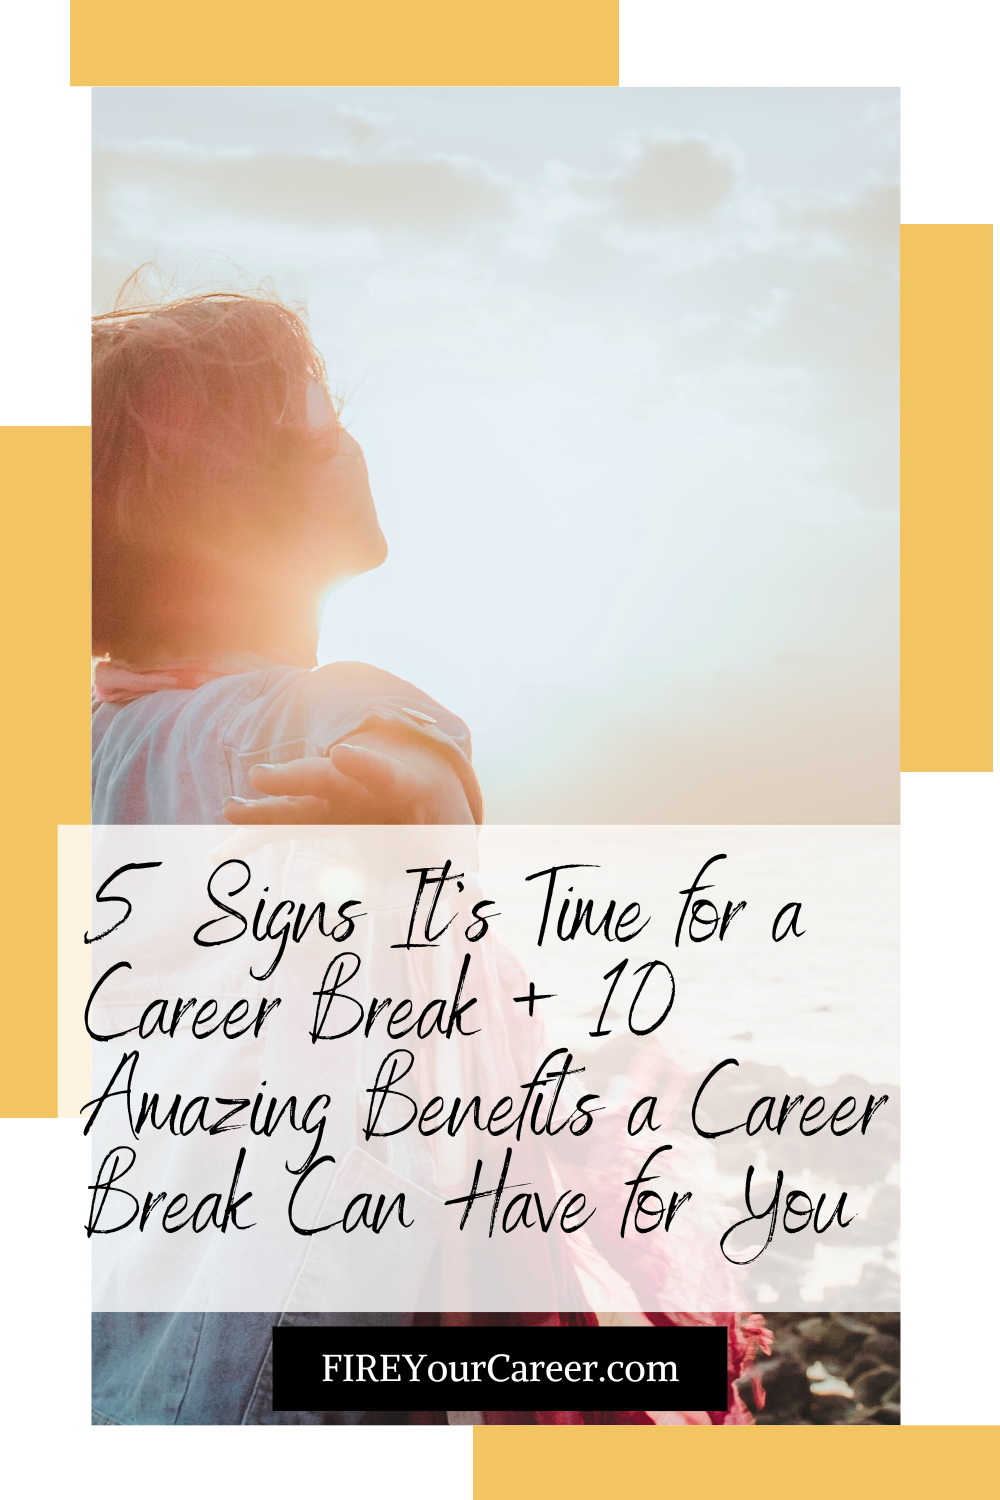 5 Signs It’s Time for a Career Break + 10 Amazing Benefits a Career Break Can Have for You Pinterest